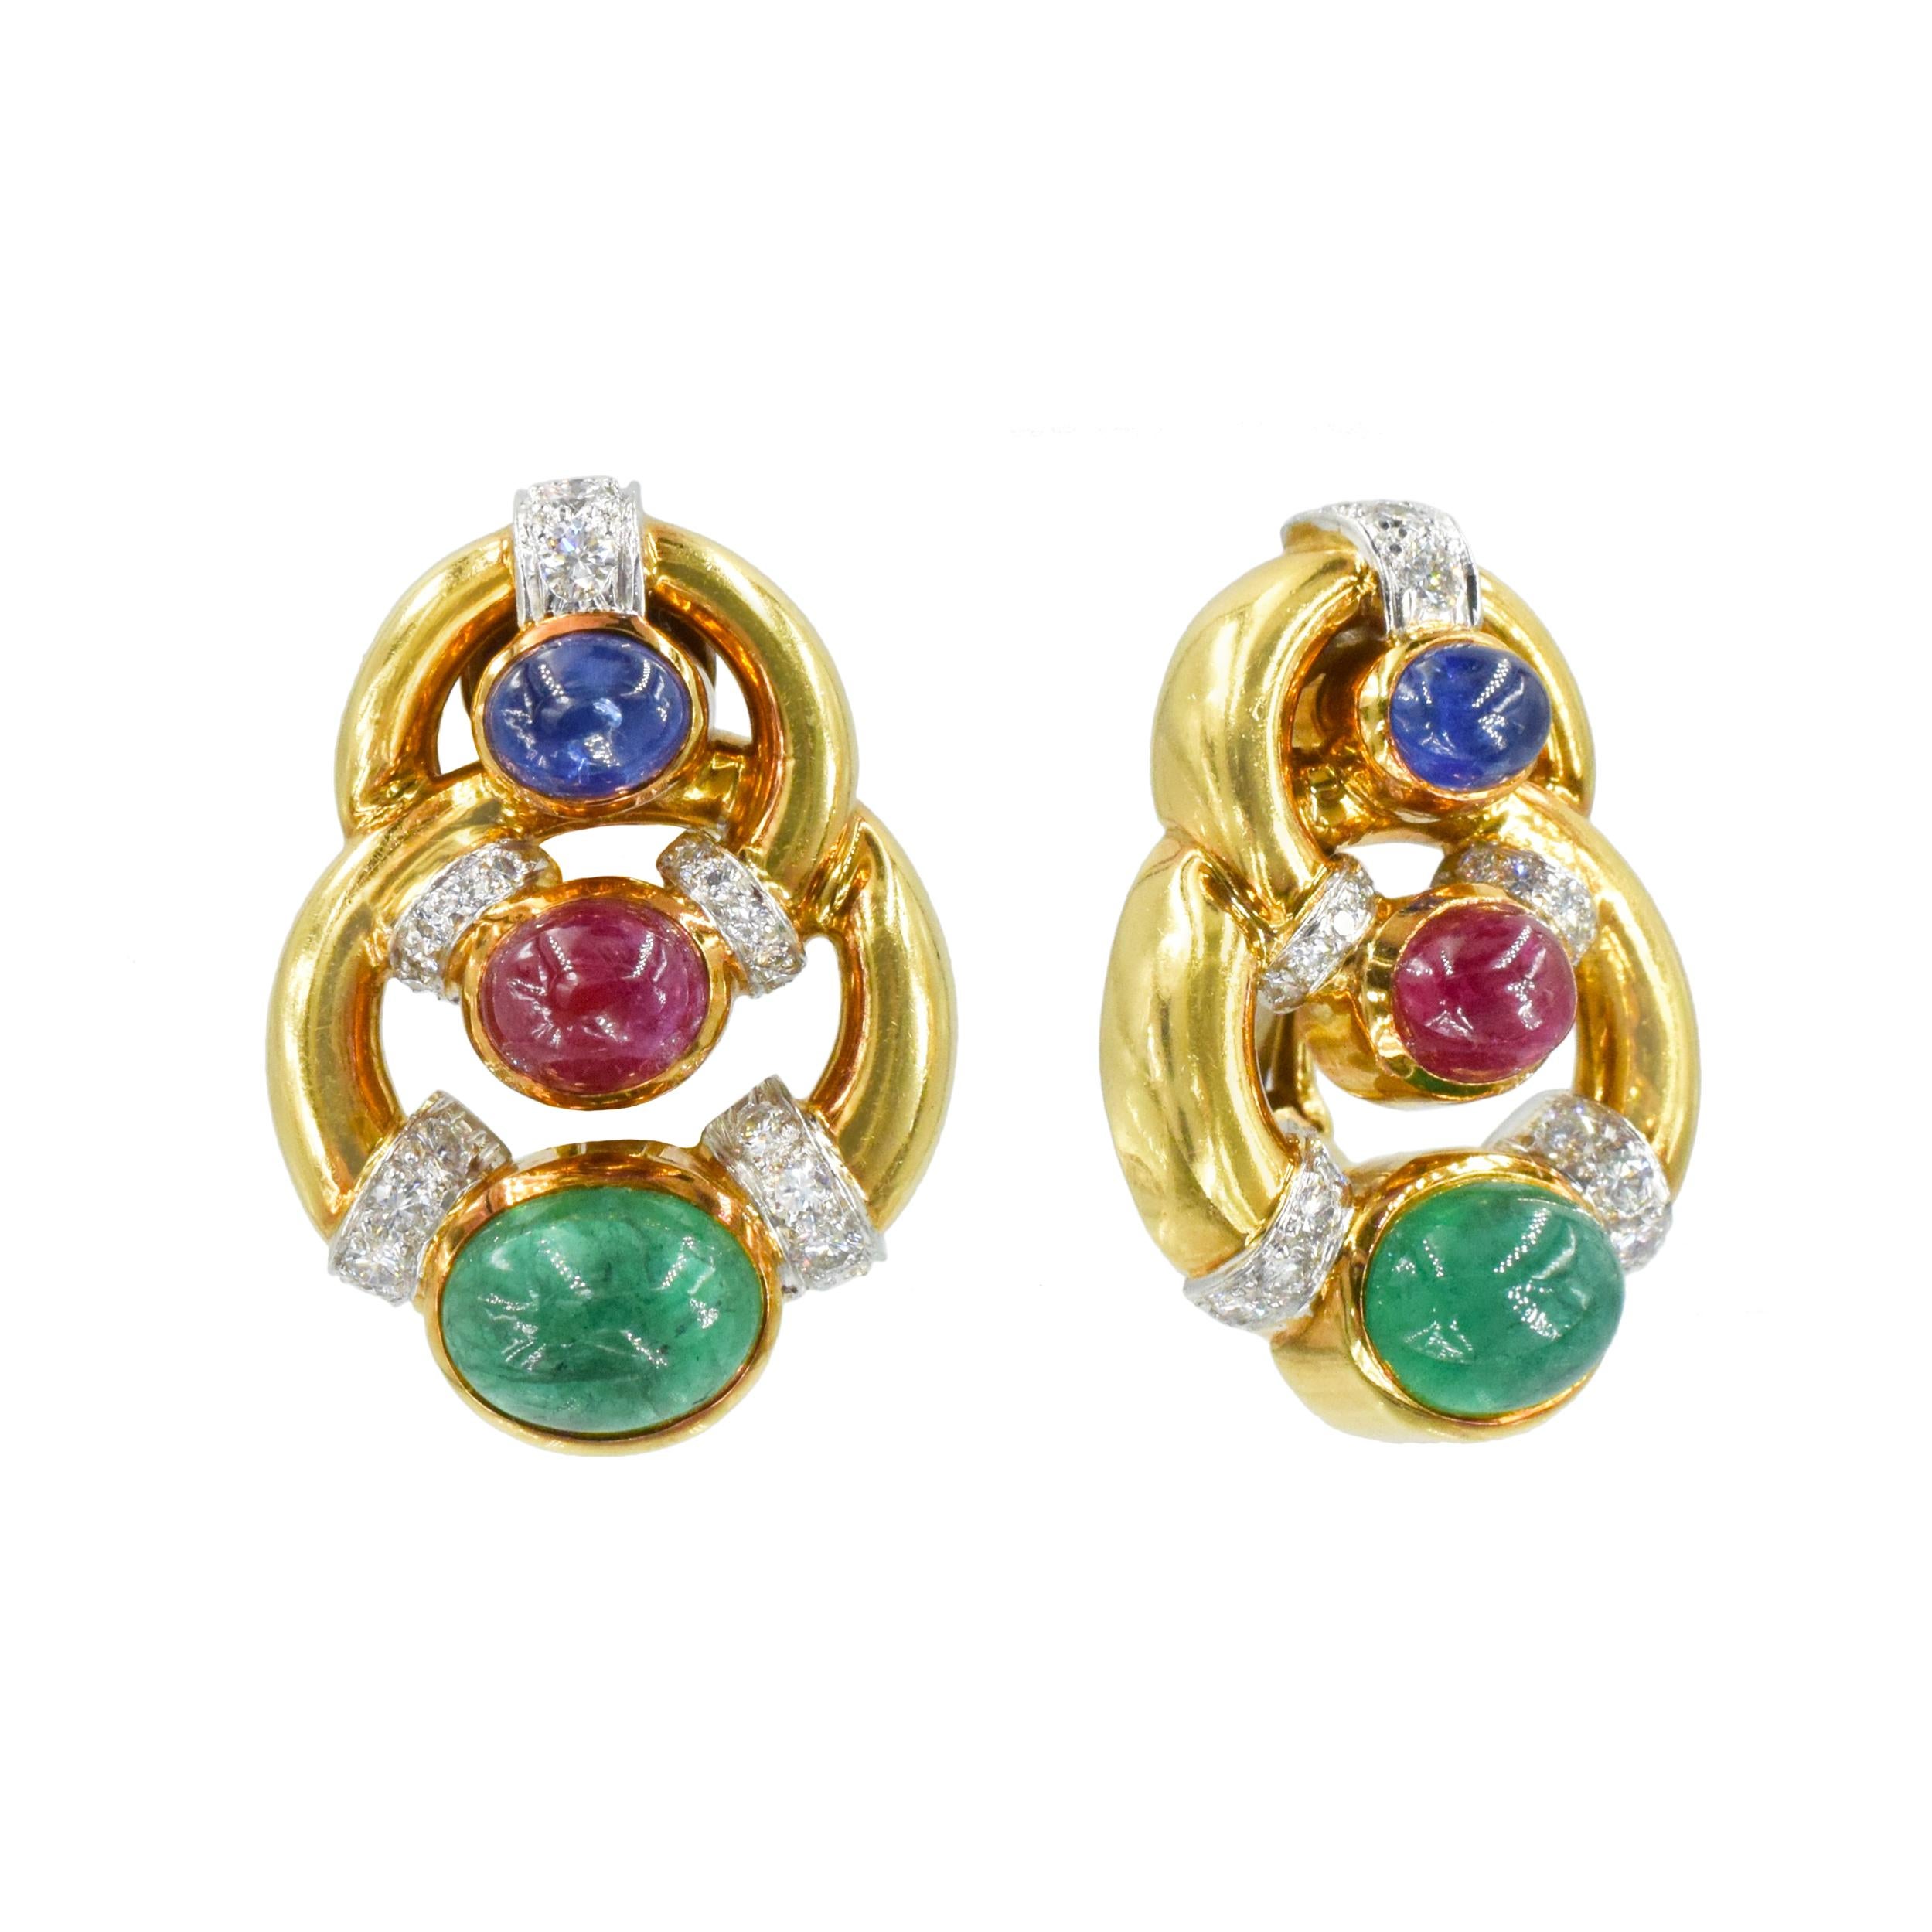 David Webb Emerald, Ruby, Sapphire And Diamond Ear Clip Earrings In 18k Yellow
Gold And Platinum.  Each earring designed as two overlapped circles, one smaller and one larger. Each bezel set with oval cabochon cut emerald, ruby and sapphire,